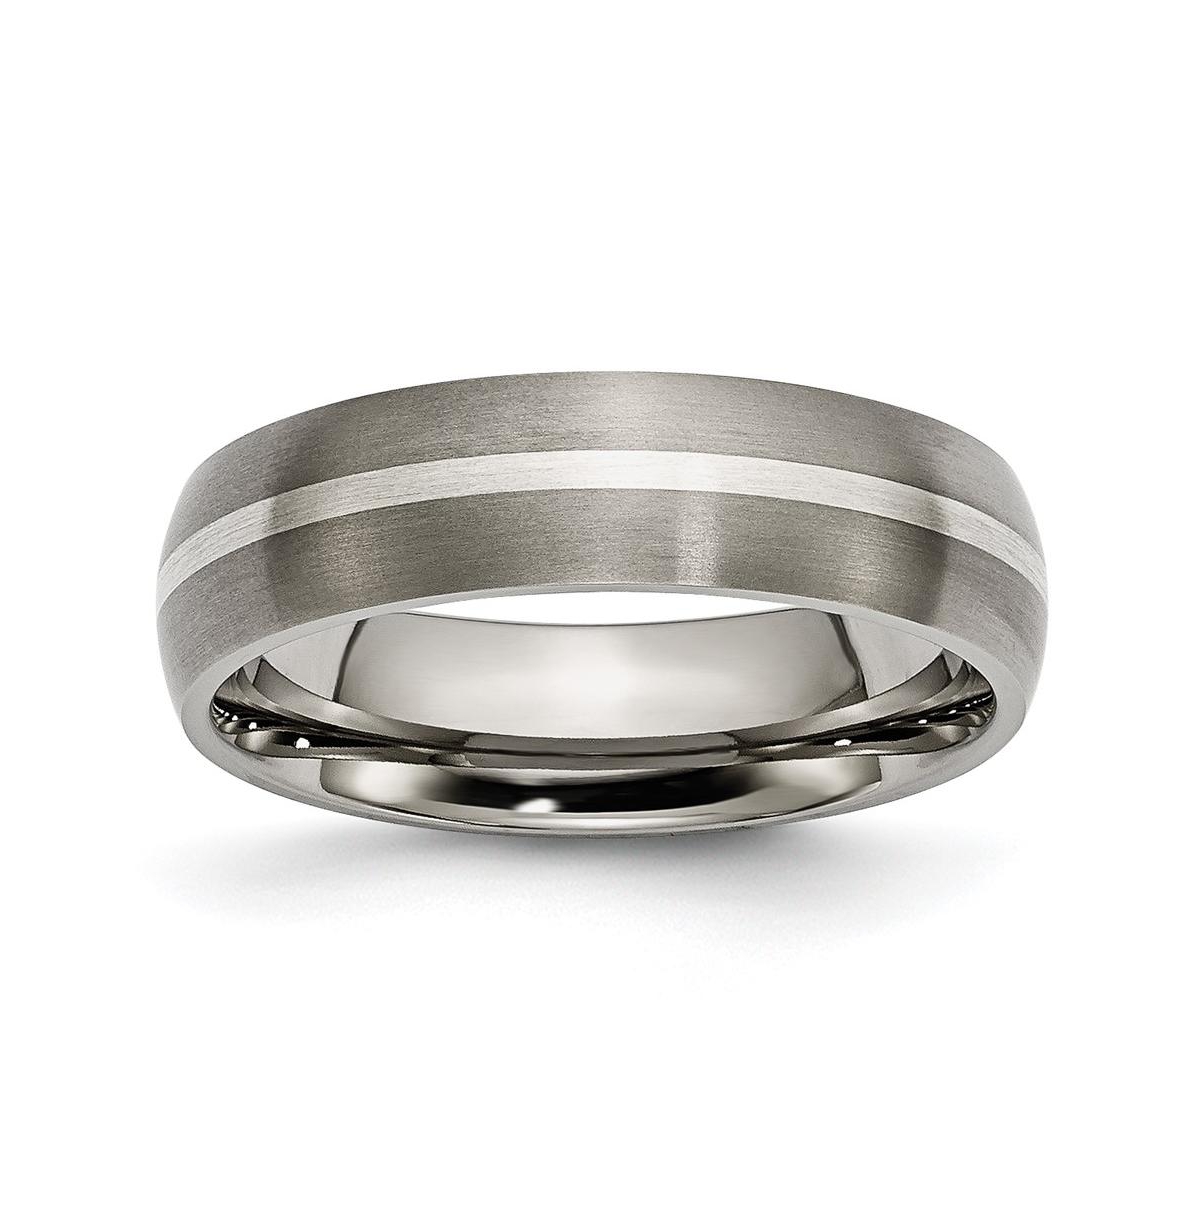 Titanium Brushed with Sterling Silver Inlay Wedding Band Ring - Grey